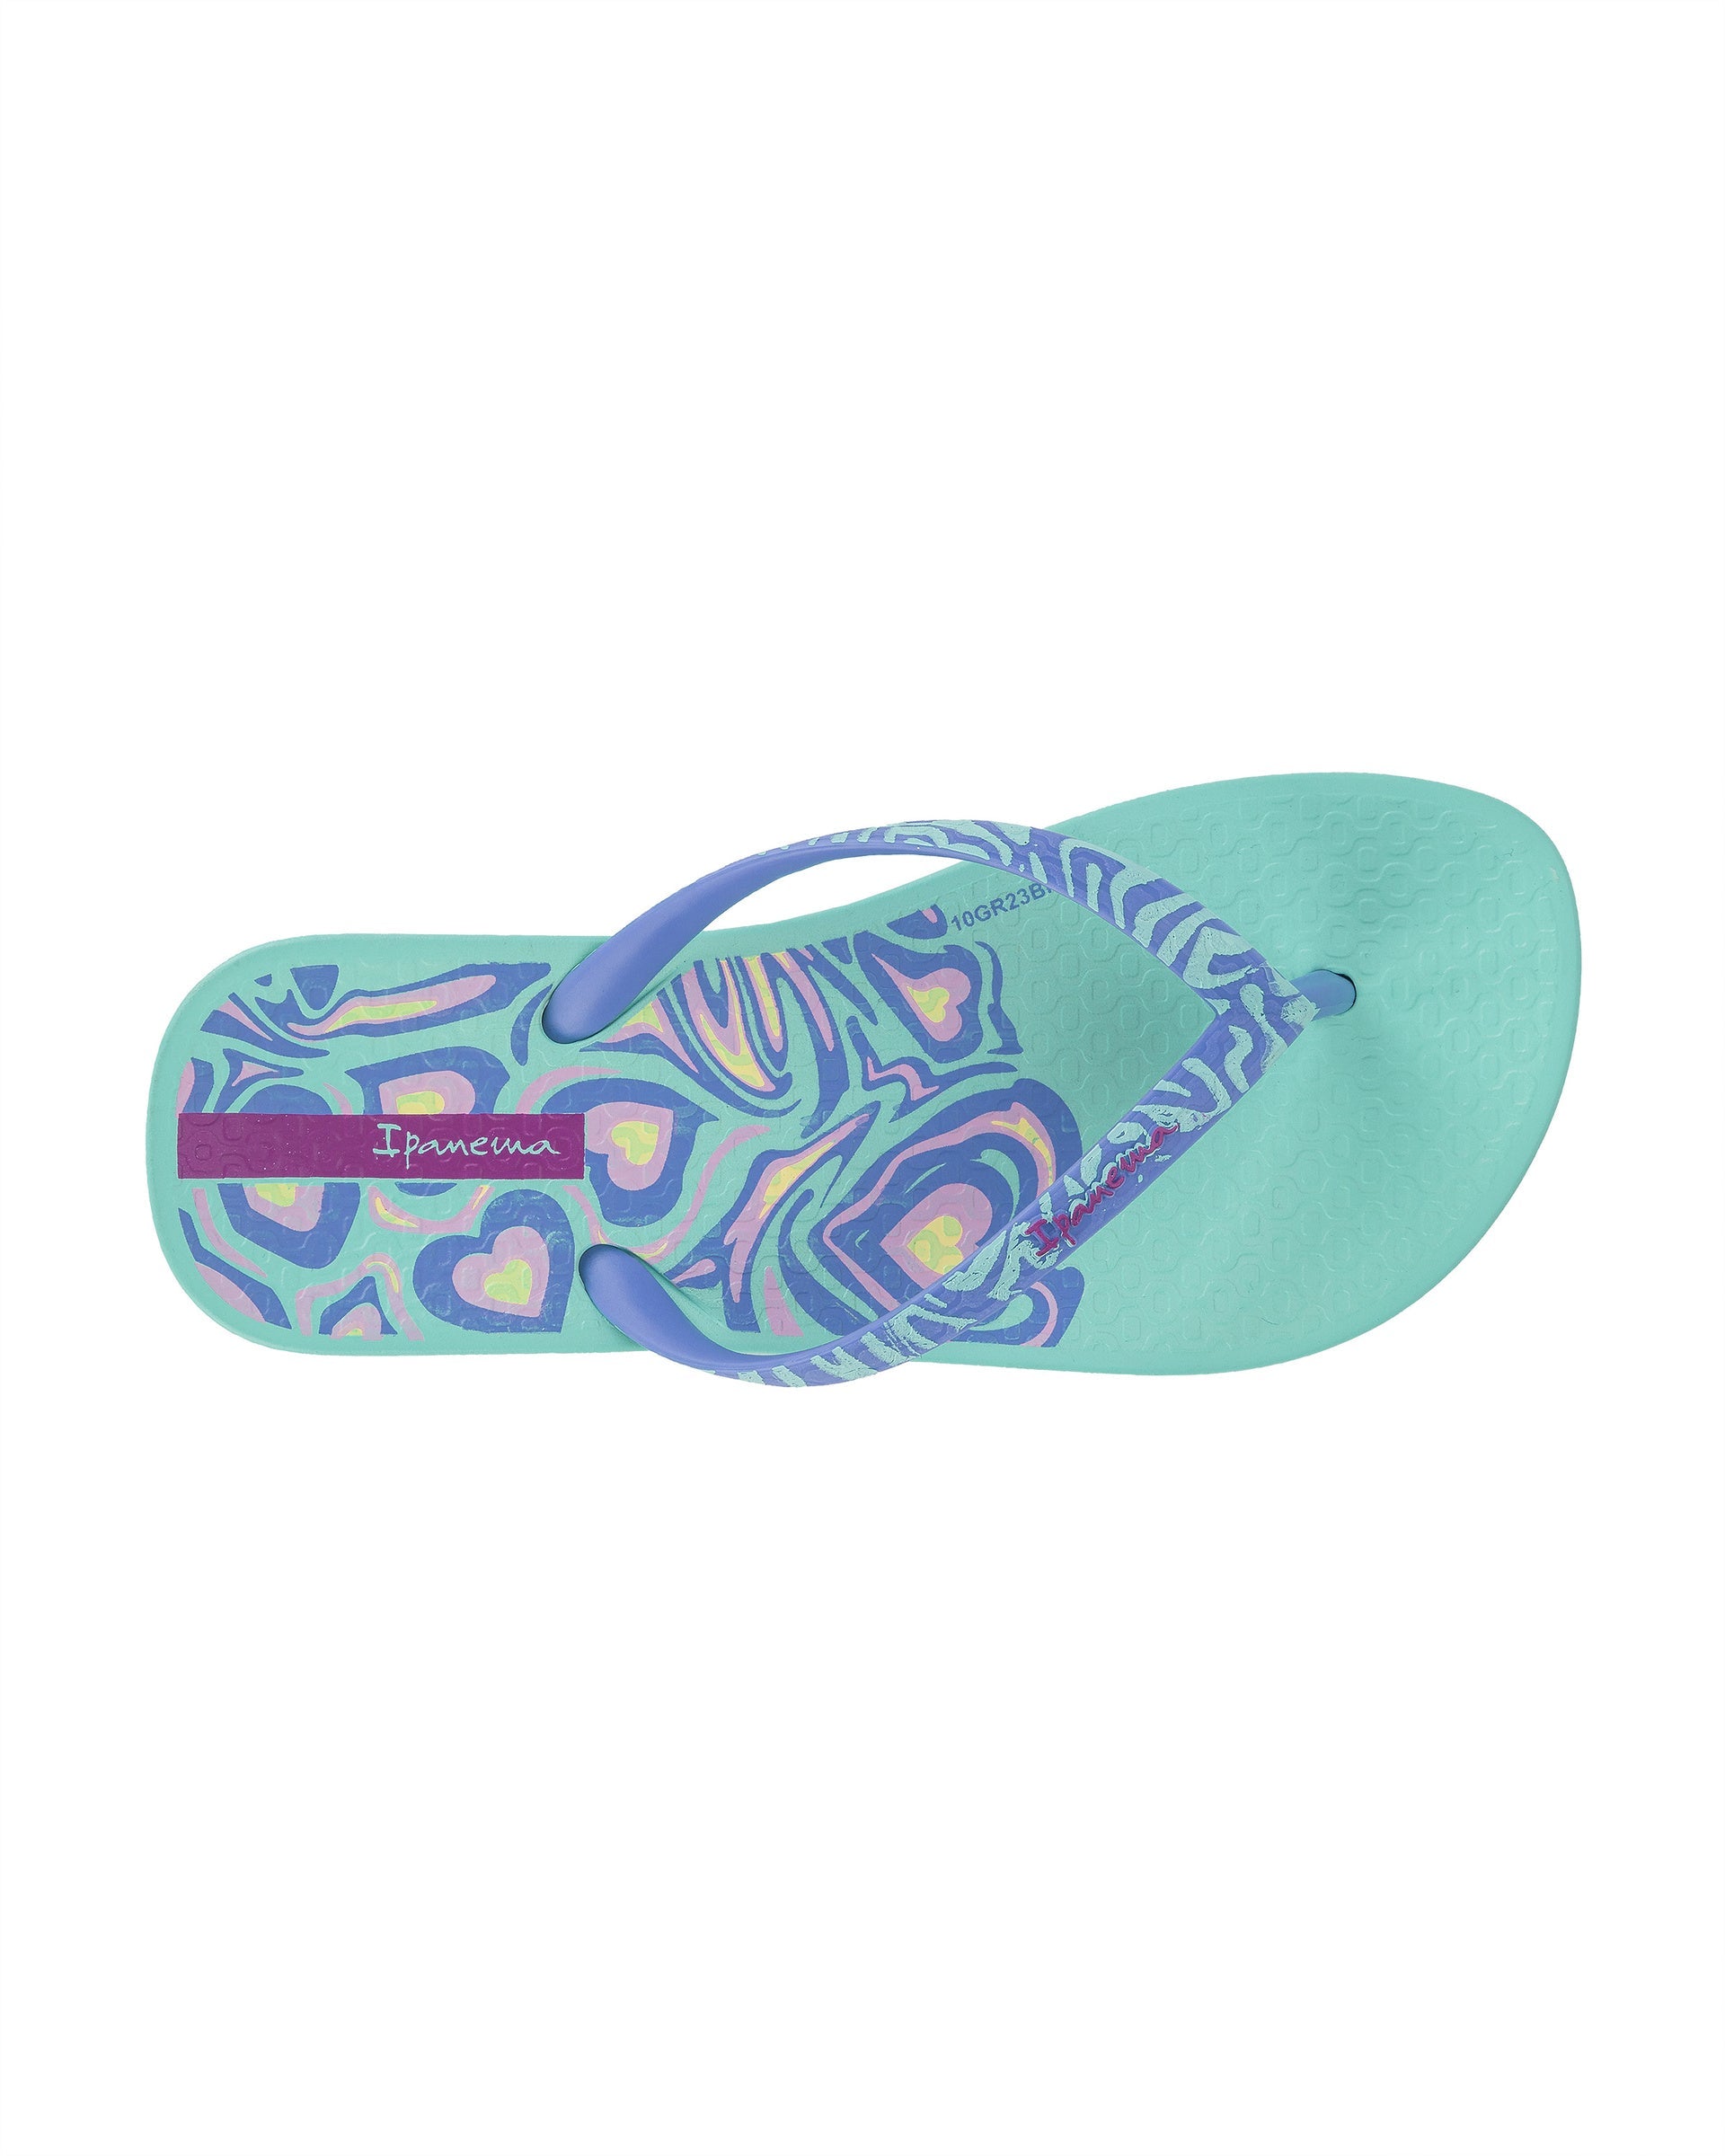 Top view of a pink Ipanema Nostalgic Hearts kid's flip flop with heart outlines on insole and strap.